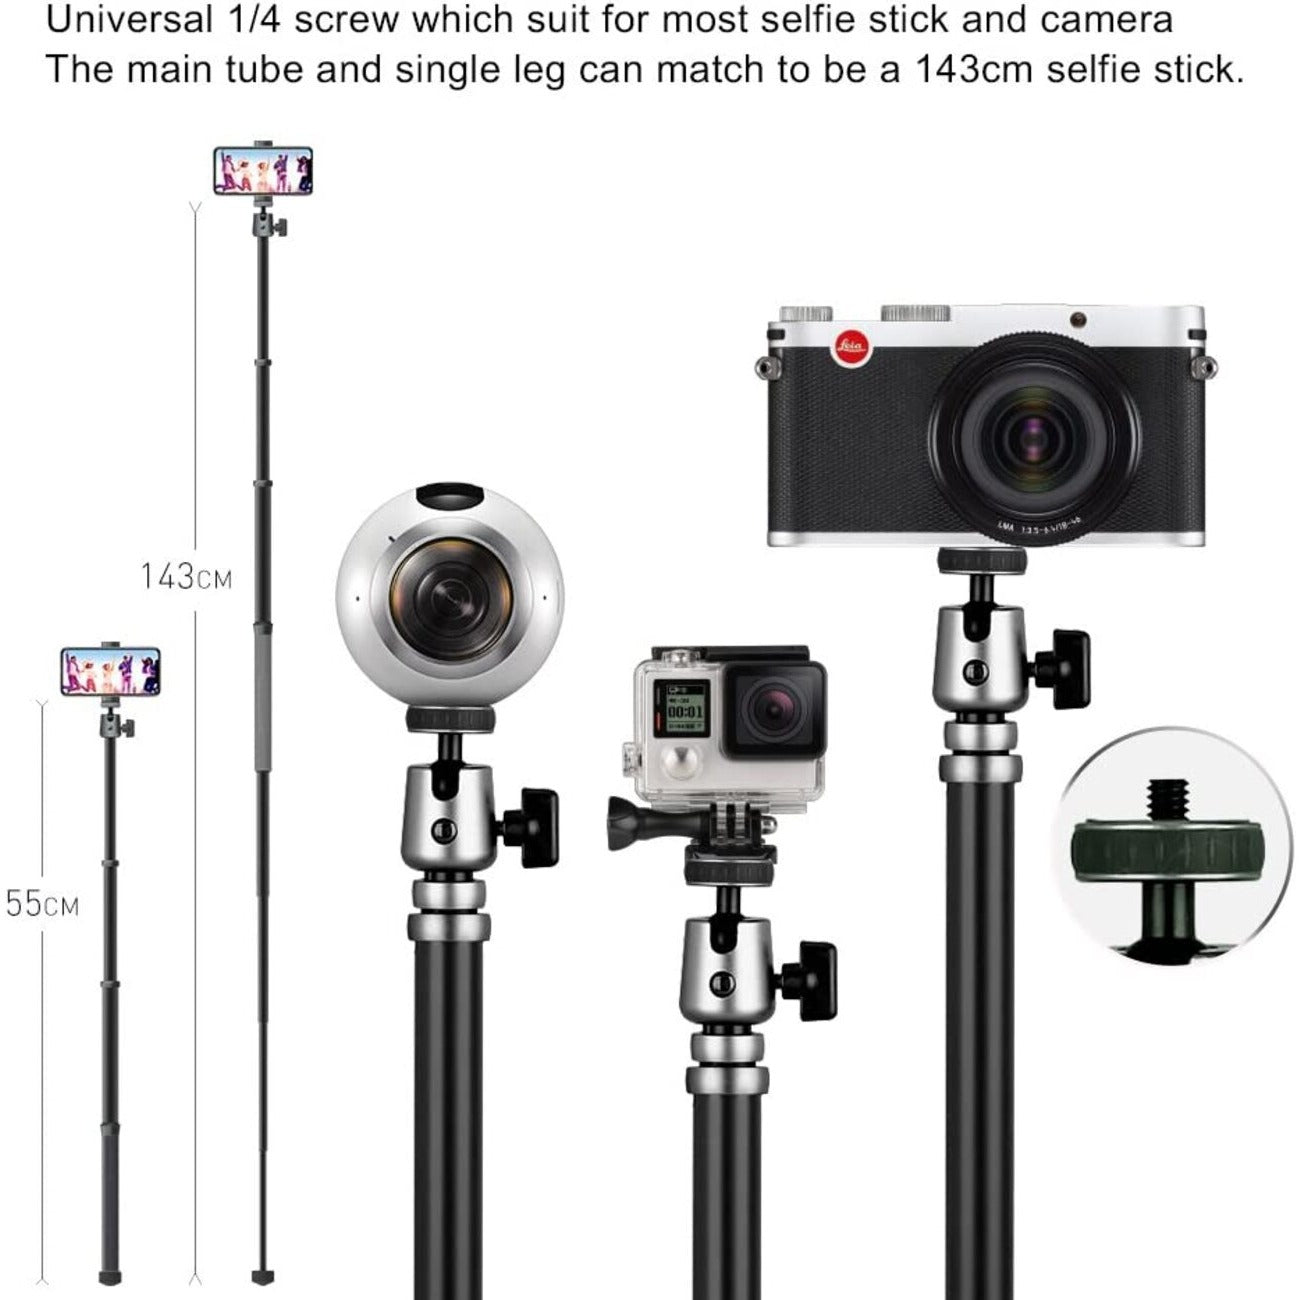 1/4 screw goes well with most selfie stick of Momax Match 360 Camera, Tripod Hero